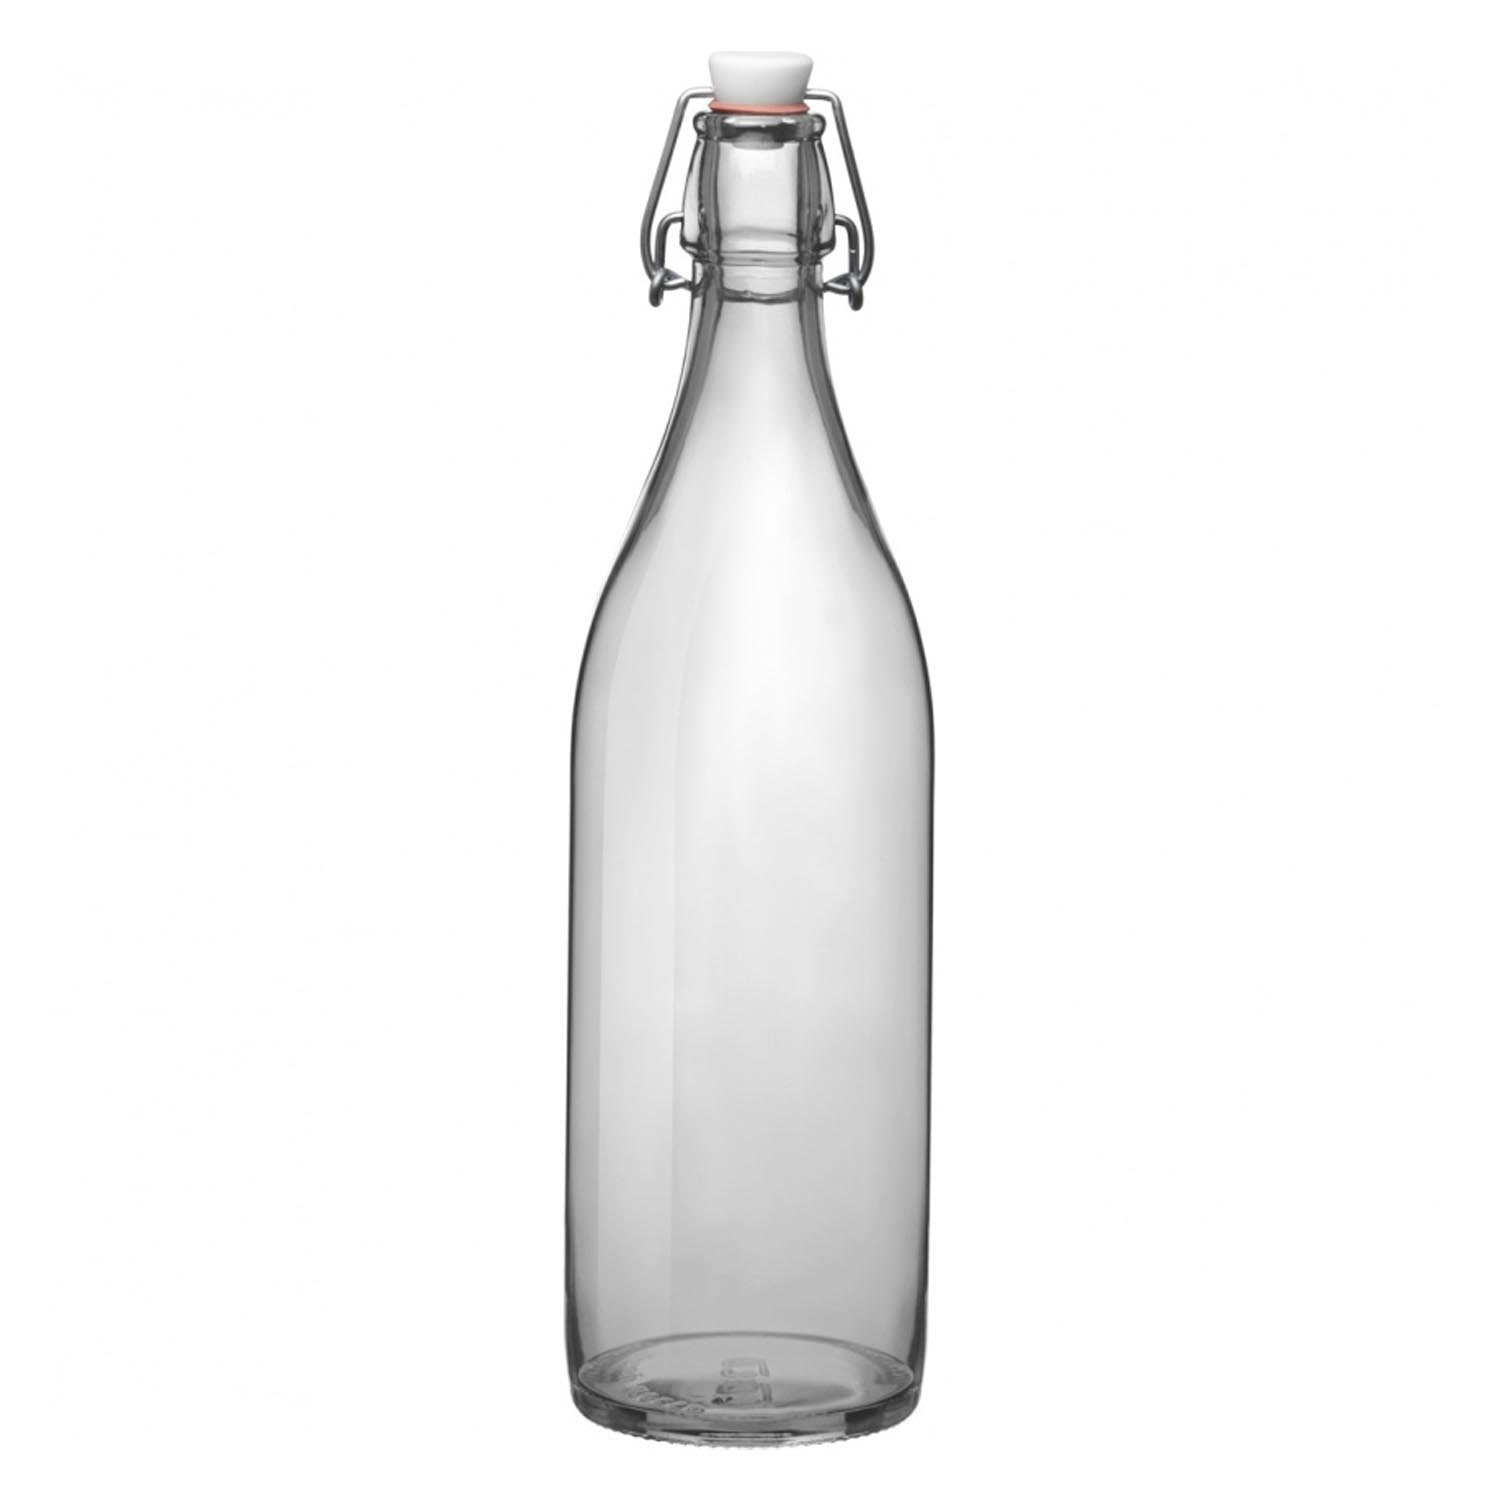 1 Liter (34 oz) Clear Giara Glass Bottle with Swing Top